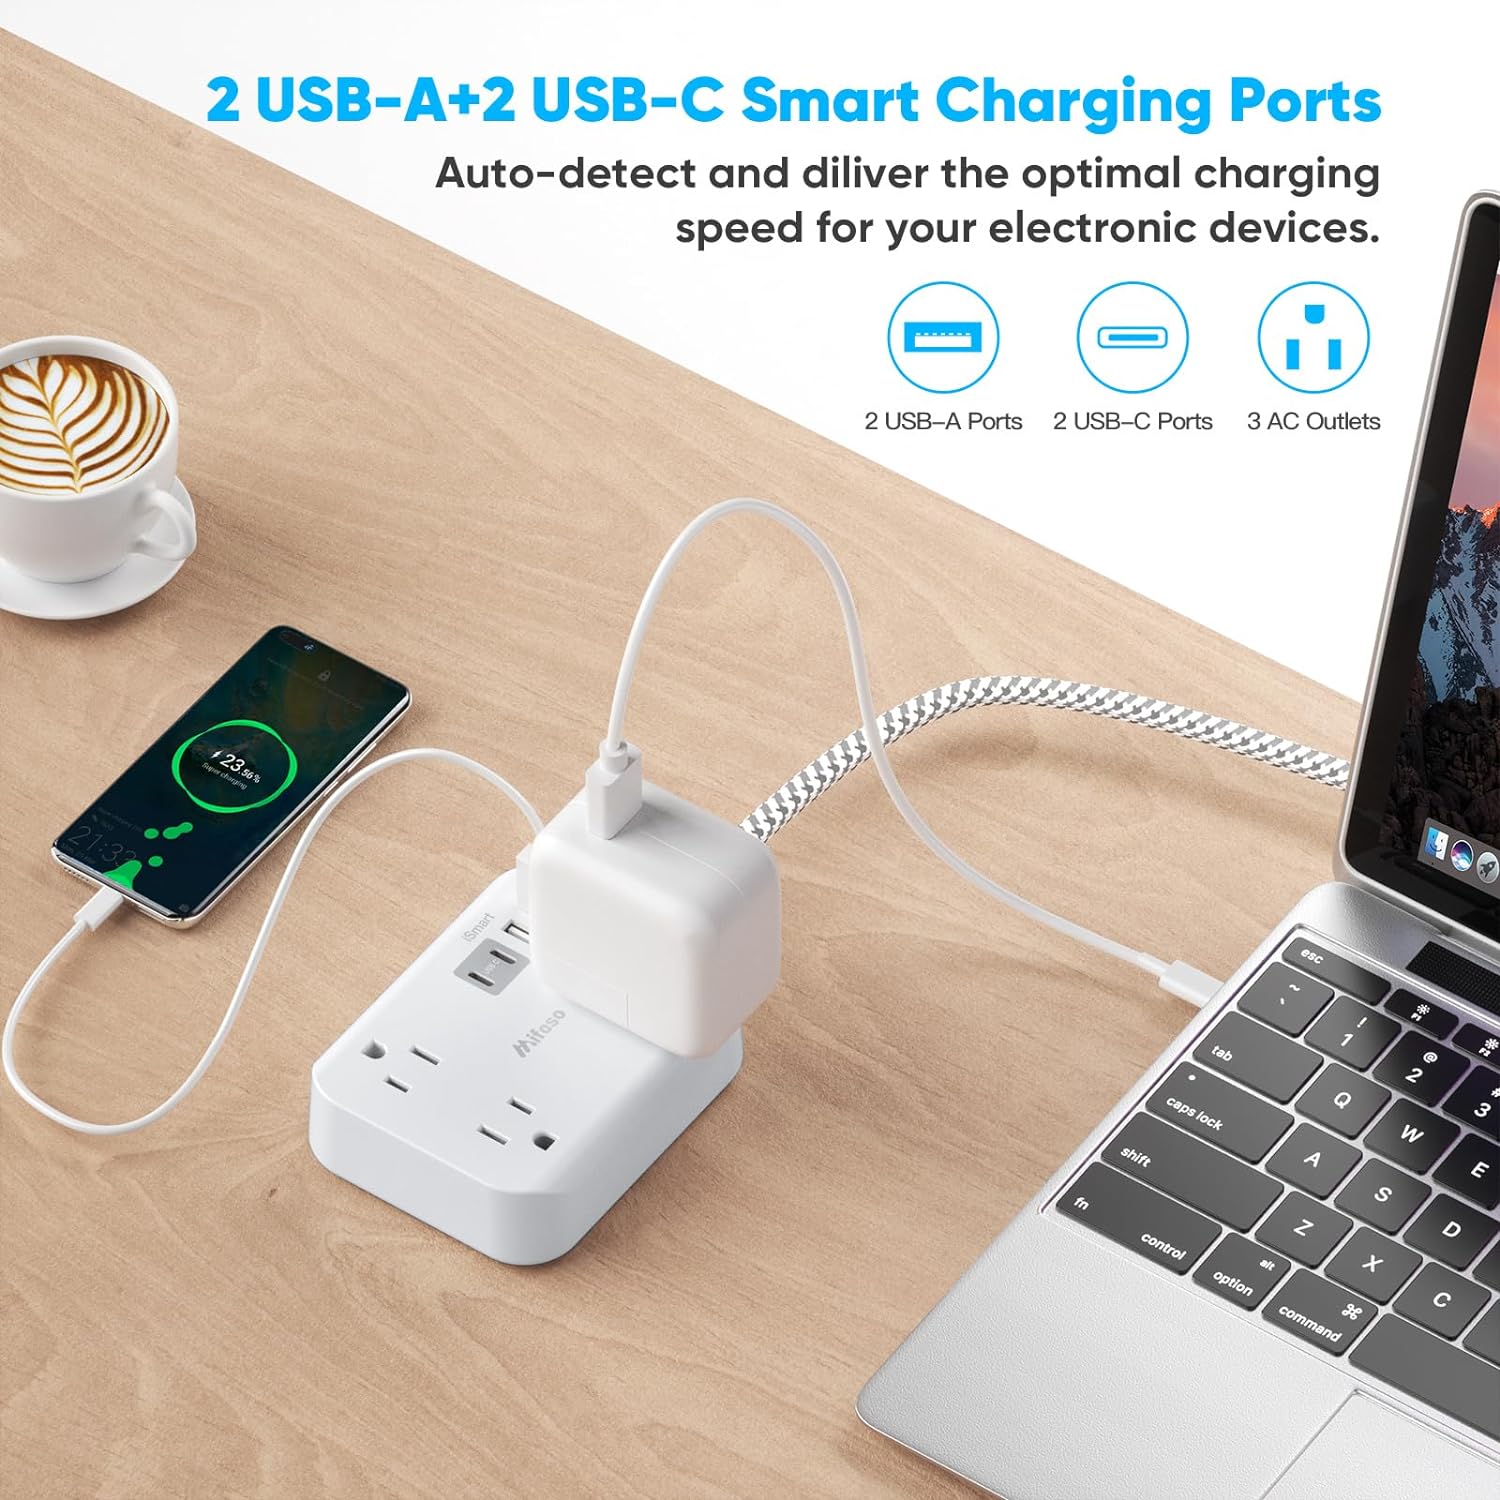 Flat Extension Cord with Multiple Outlets, 5ft Flat Plug Power Strip with 4 USB Ports (2USB C) Charging Station, Cruise Essentials, No Surge Protector for Travel, Home, Dorm